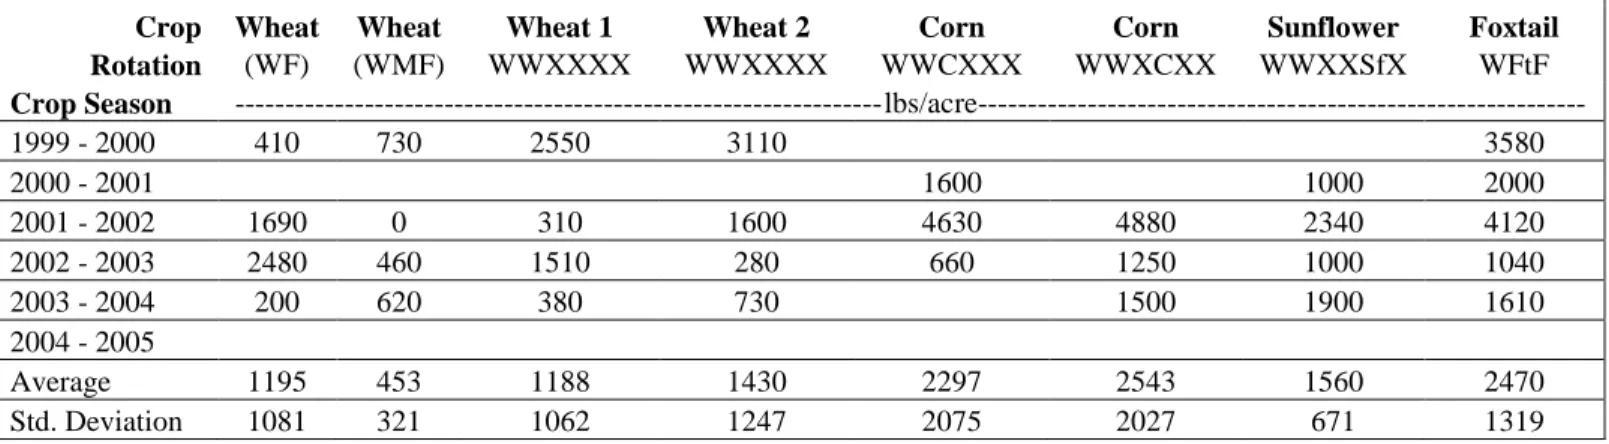 Table 8. Crop residue weights by crop, rotation, and year at Briggsdale.       